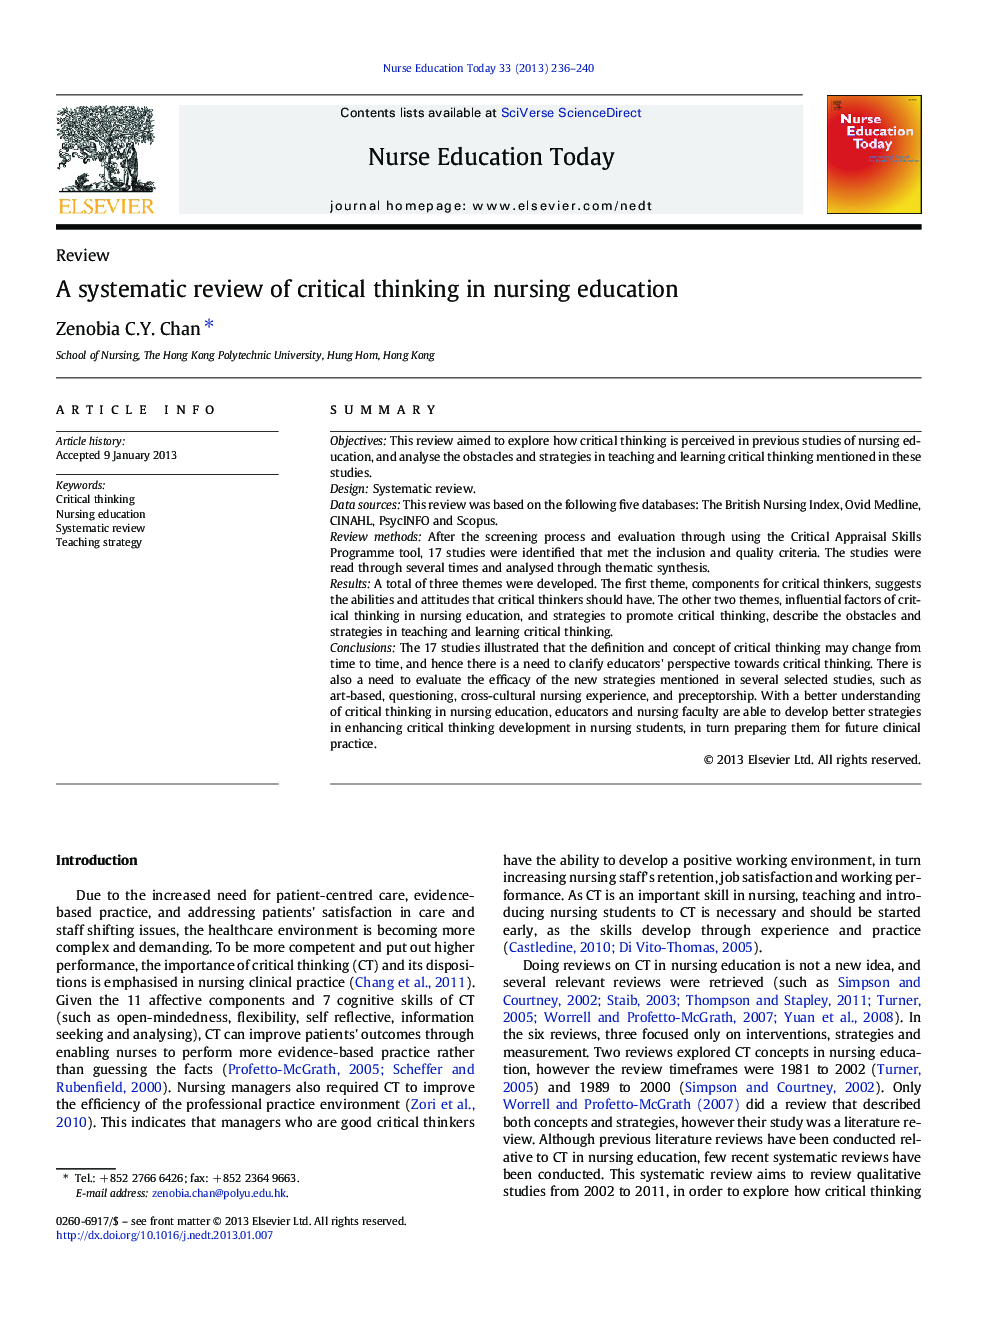 A systematic review of critical thinking in nursing education